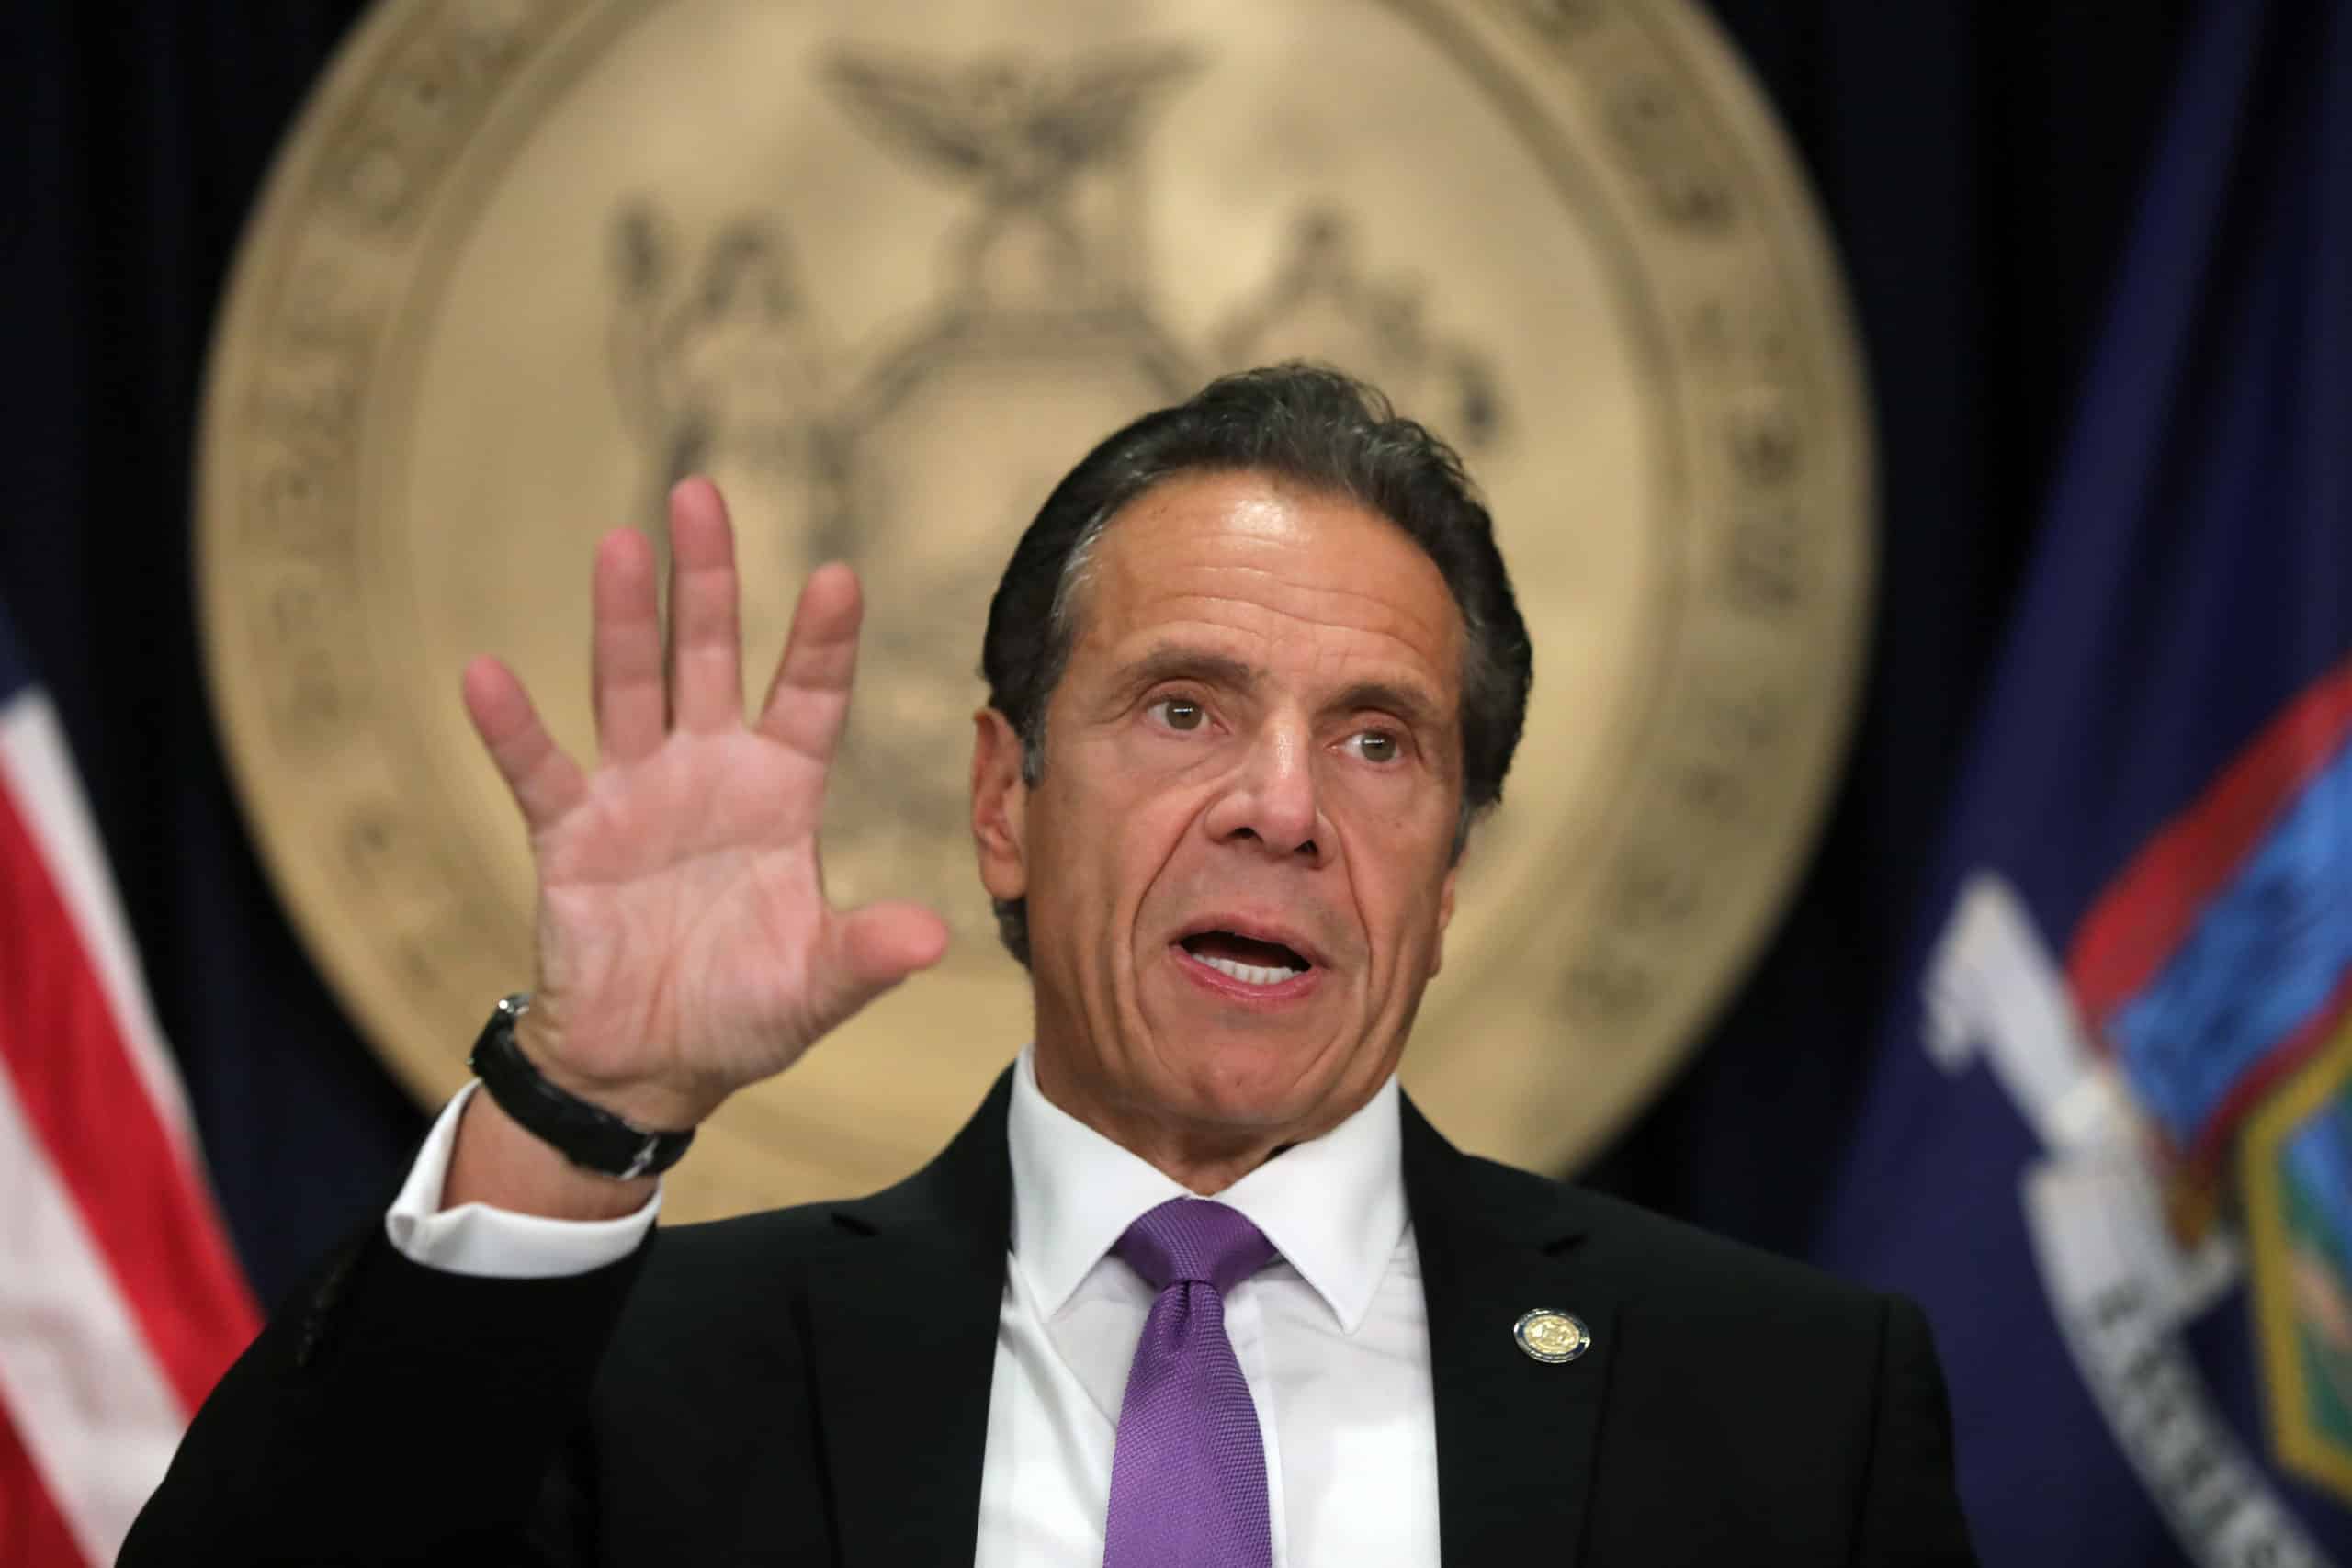 New York Governor Andrew Cuomo Resigns Following Findings Of Sexual Harassment Investigation